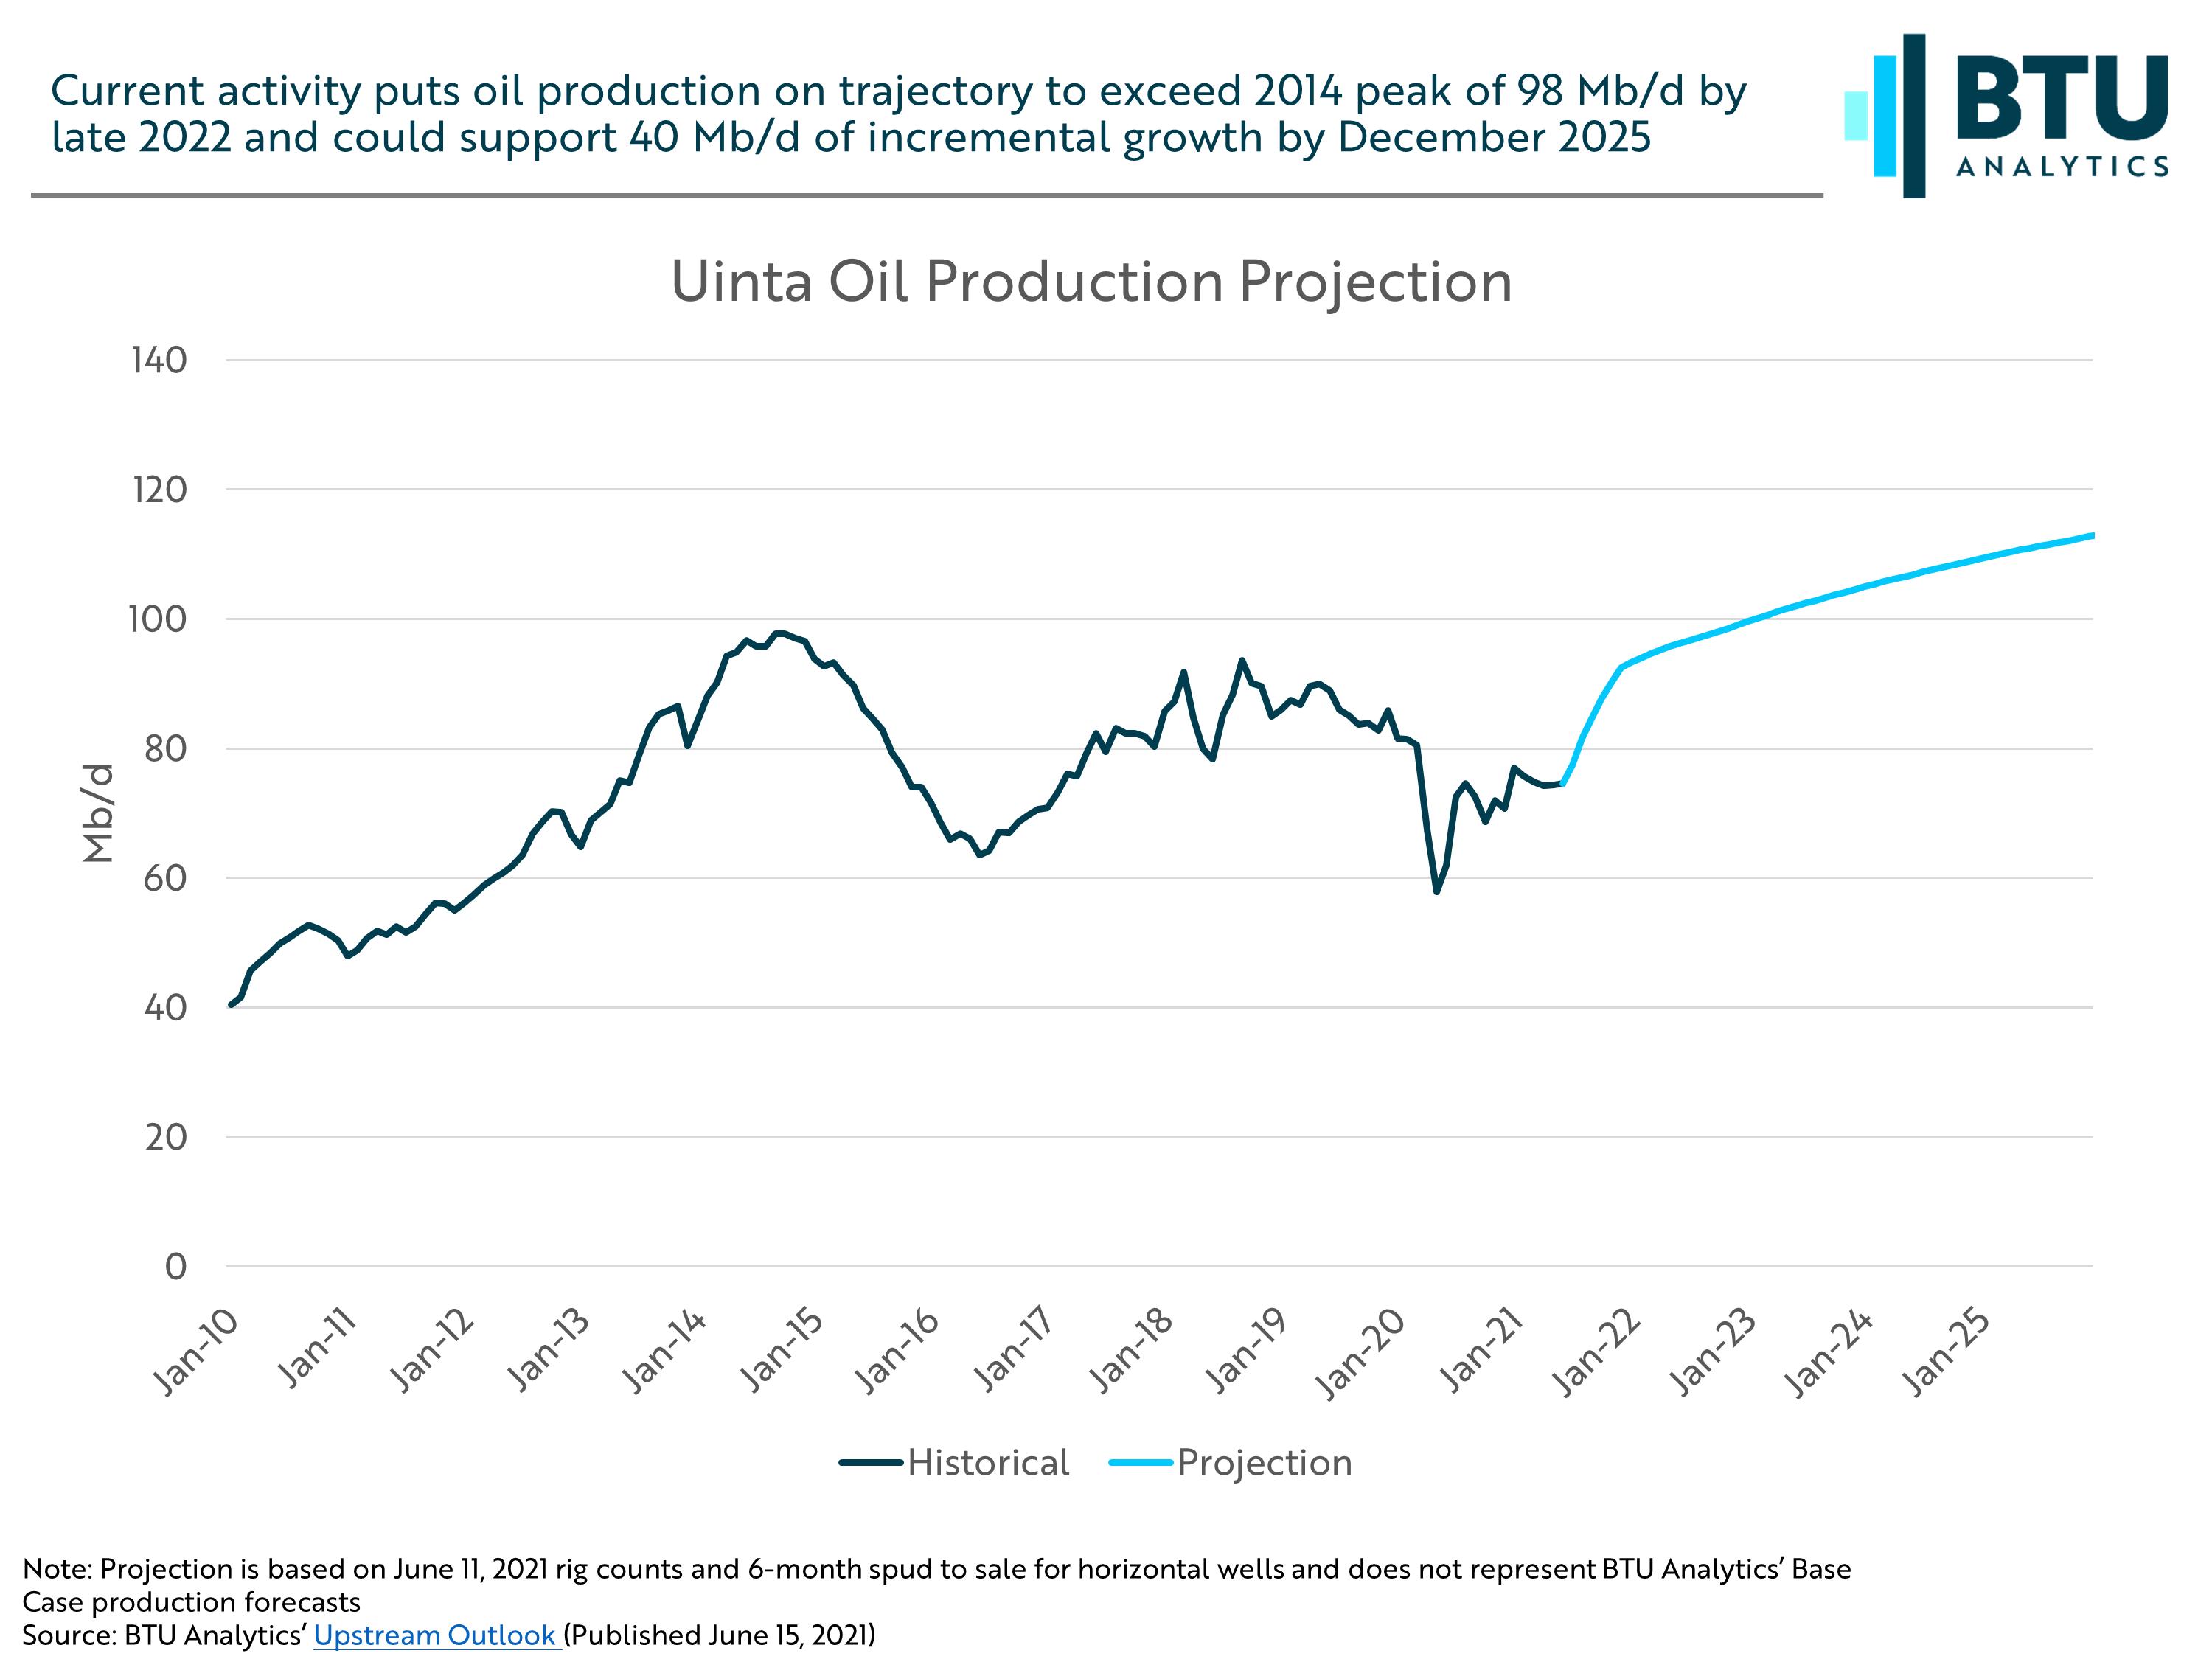 Uinta Oil Production Project - Current Activity